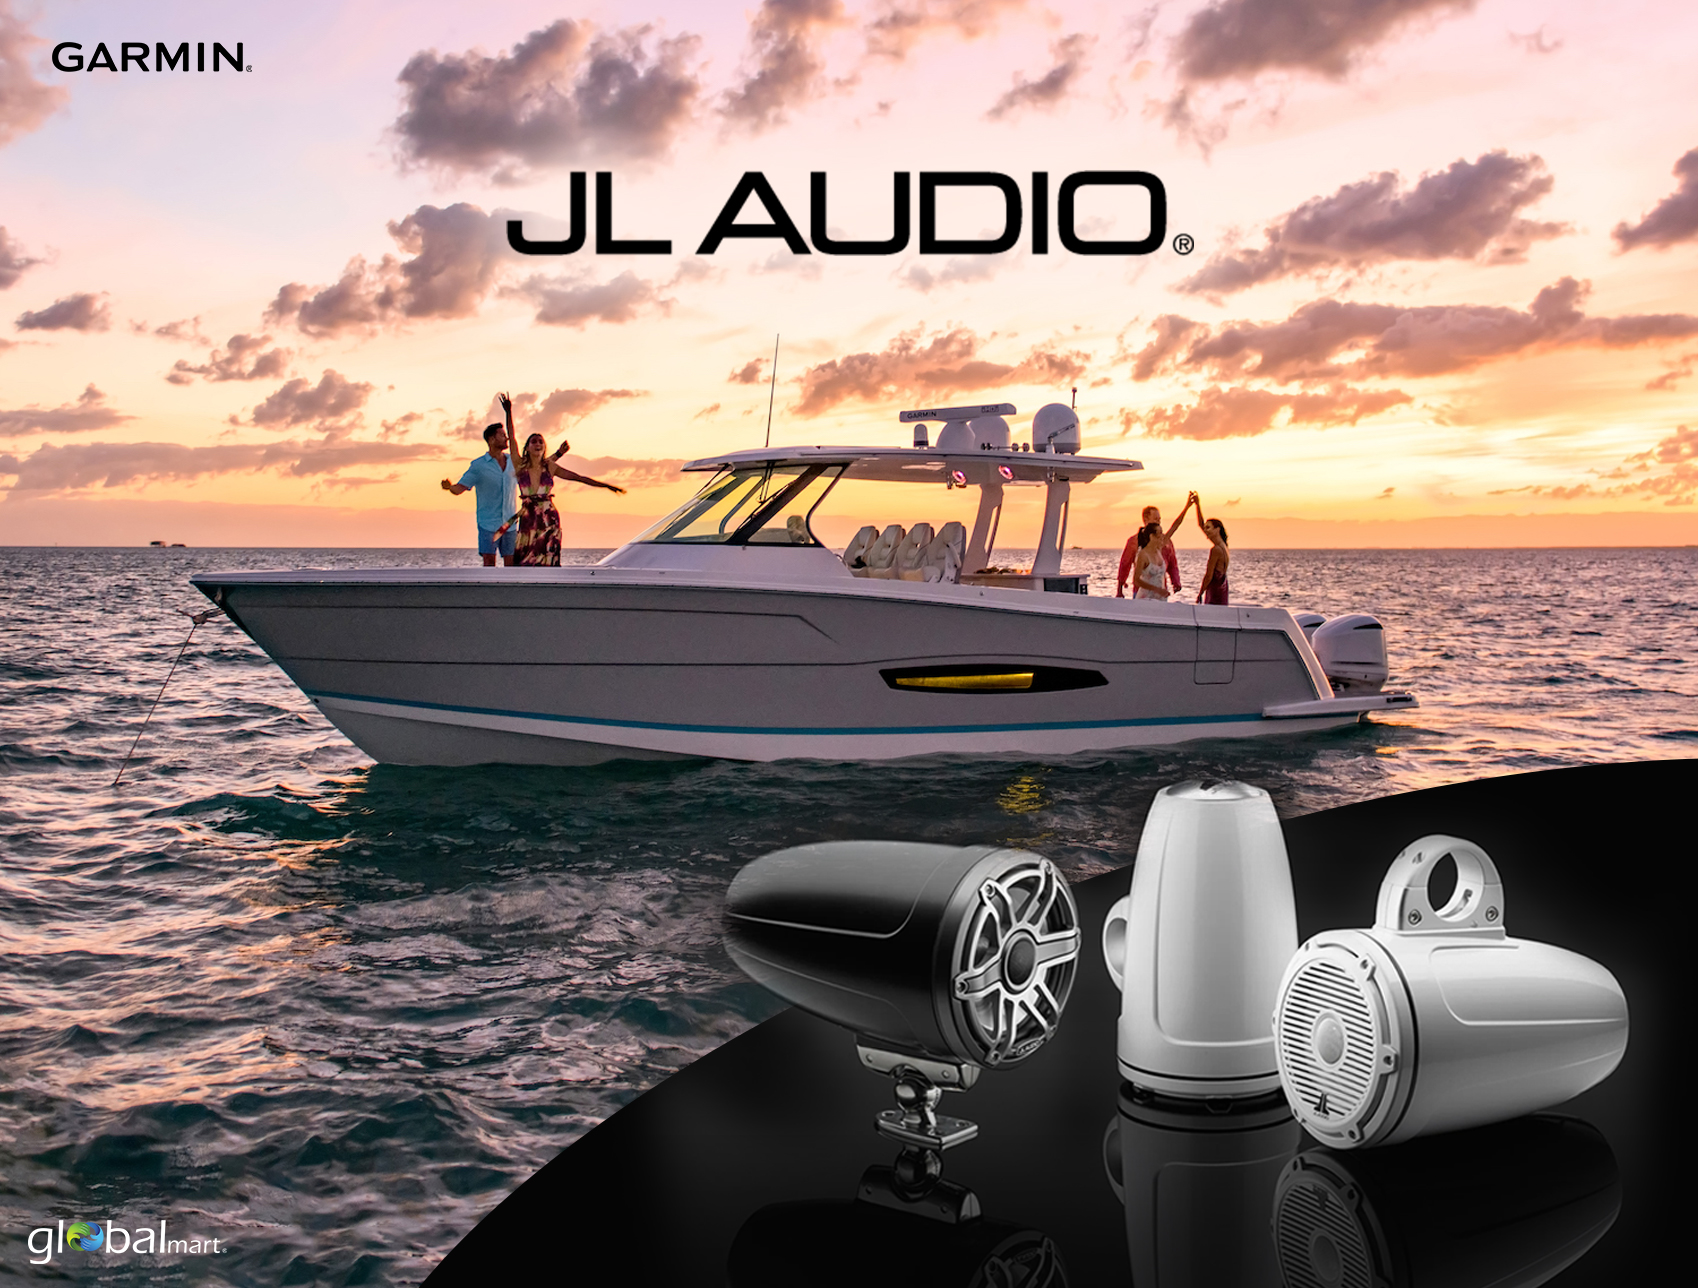 Garmin Acquires JL Audio: A Perfect Harmonization of Sound and Technology